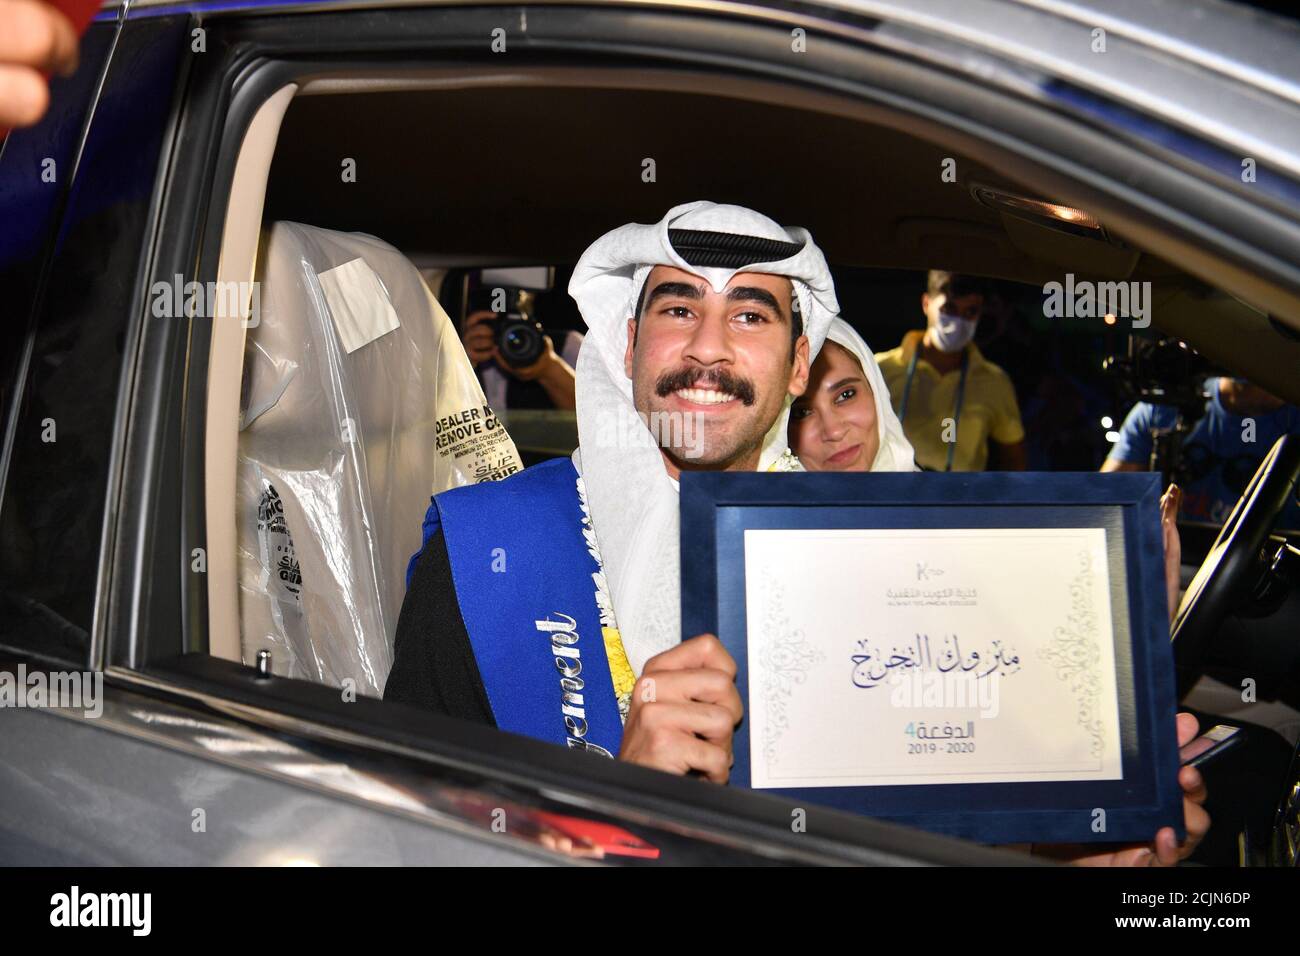 (200915) -- AHMADI GOVERNORATE, Sept. 15, 2020 (Xinhua) -- A student shows a diploma during a drive-through graduation ceremony at Kuwait Technical College (K-Tech) in Ahmadi Governorate, Kuwait, Sept. 9, 2020. Kuwait Technical College (K-Tech) celebrated its students' graduation in the first of its kind drive-through ceremony. More than 125 students gathered in the university's parking lot to receive their degree while driving-through to the president and keeping social distancing protocols in place. TO GO WITH 'Feature: Kuwaiti students celebrate graduation with drive-through, virtua Stock Photo